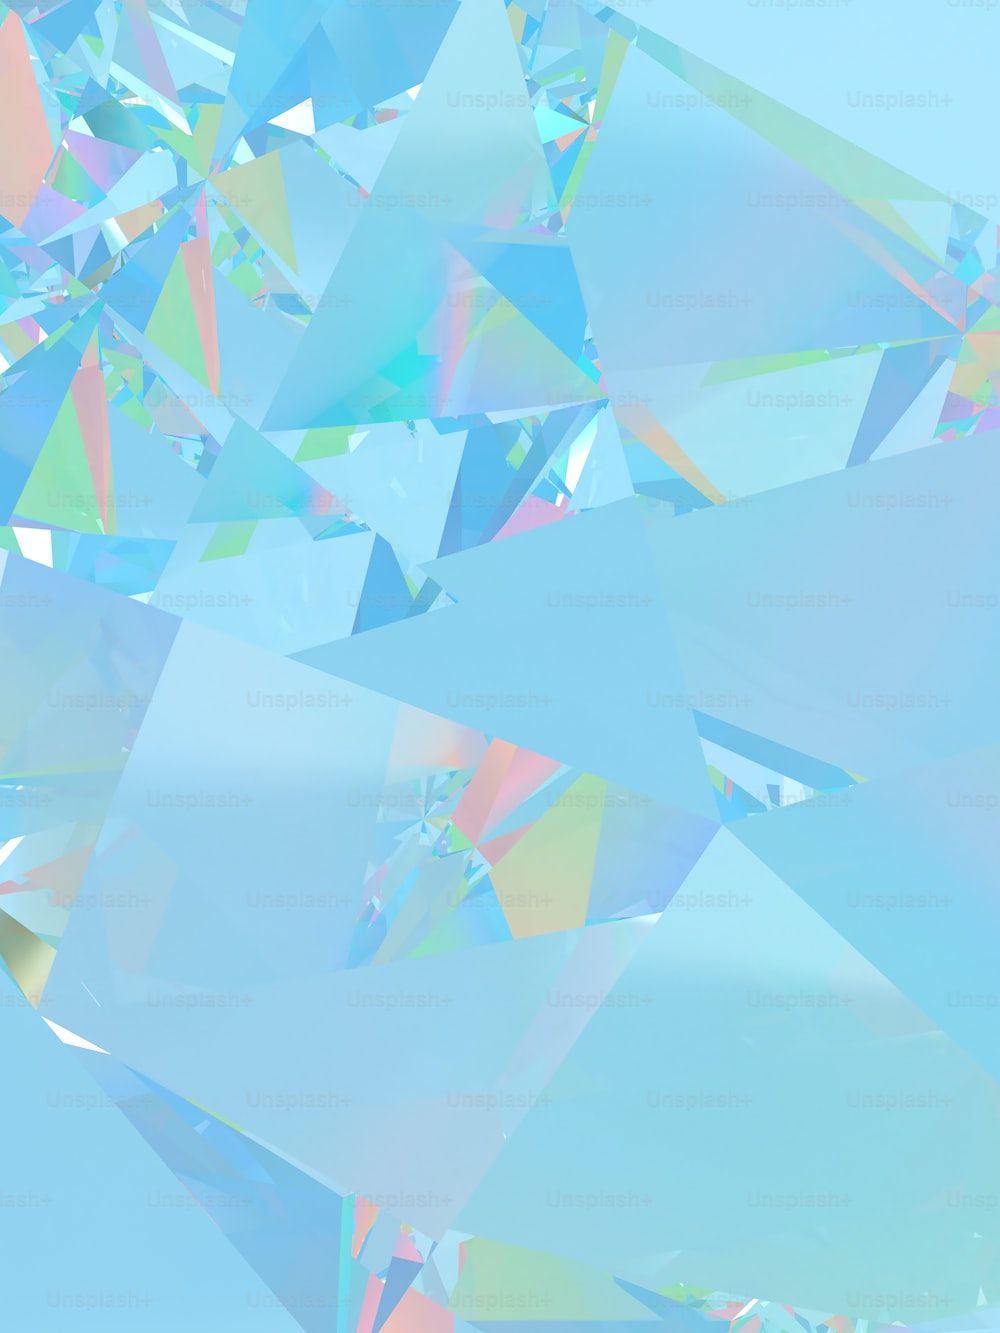 A blue and white abstract background - Diamond